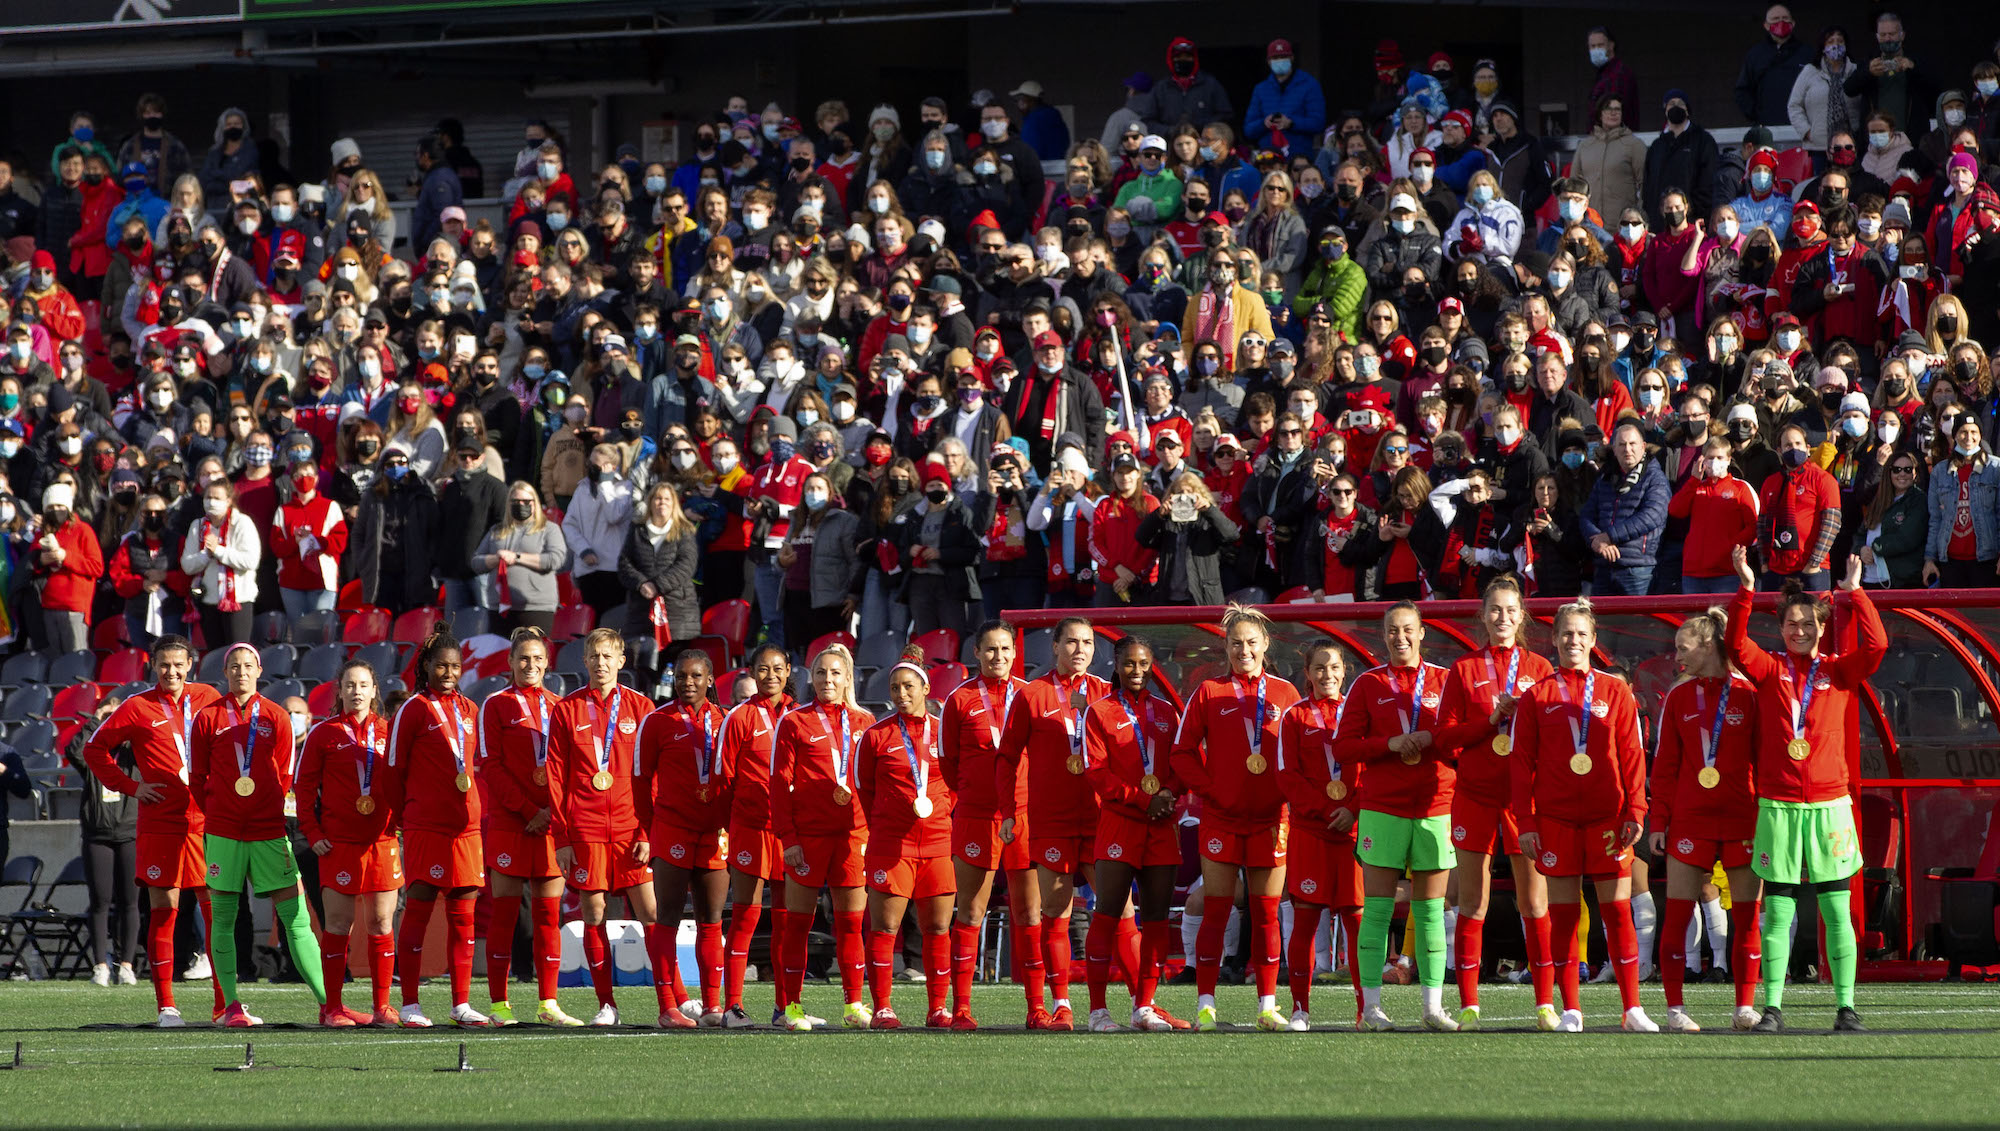 Team Canada stands at mid-field with their Olympic Gold Medals before the first of the Canadian Women's National Team Olympic Gold Medal Celebration Tour games against the New Zealand Womens Football Ferns national team.